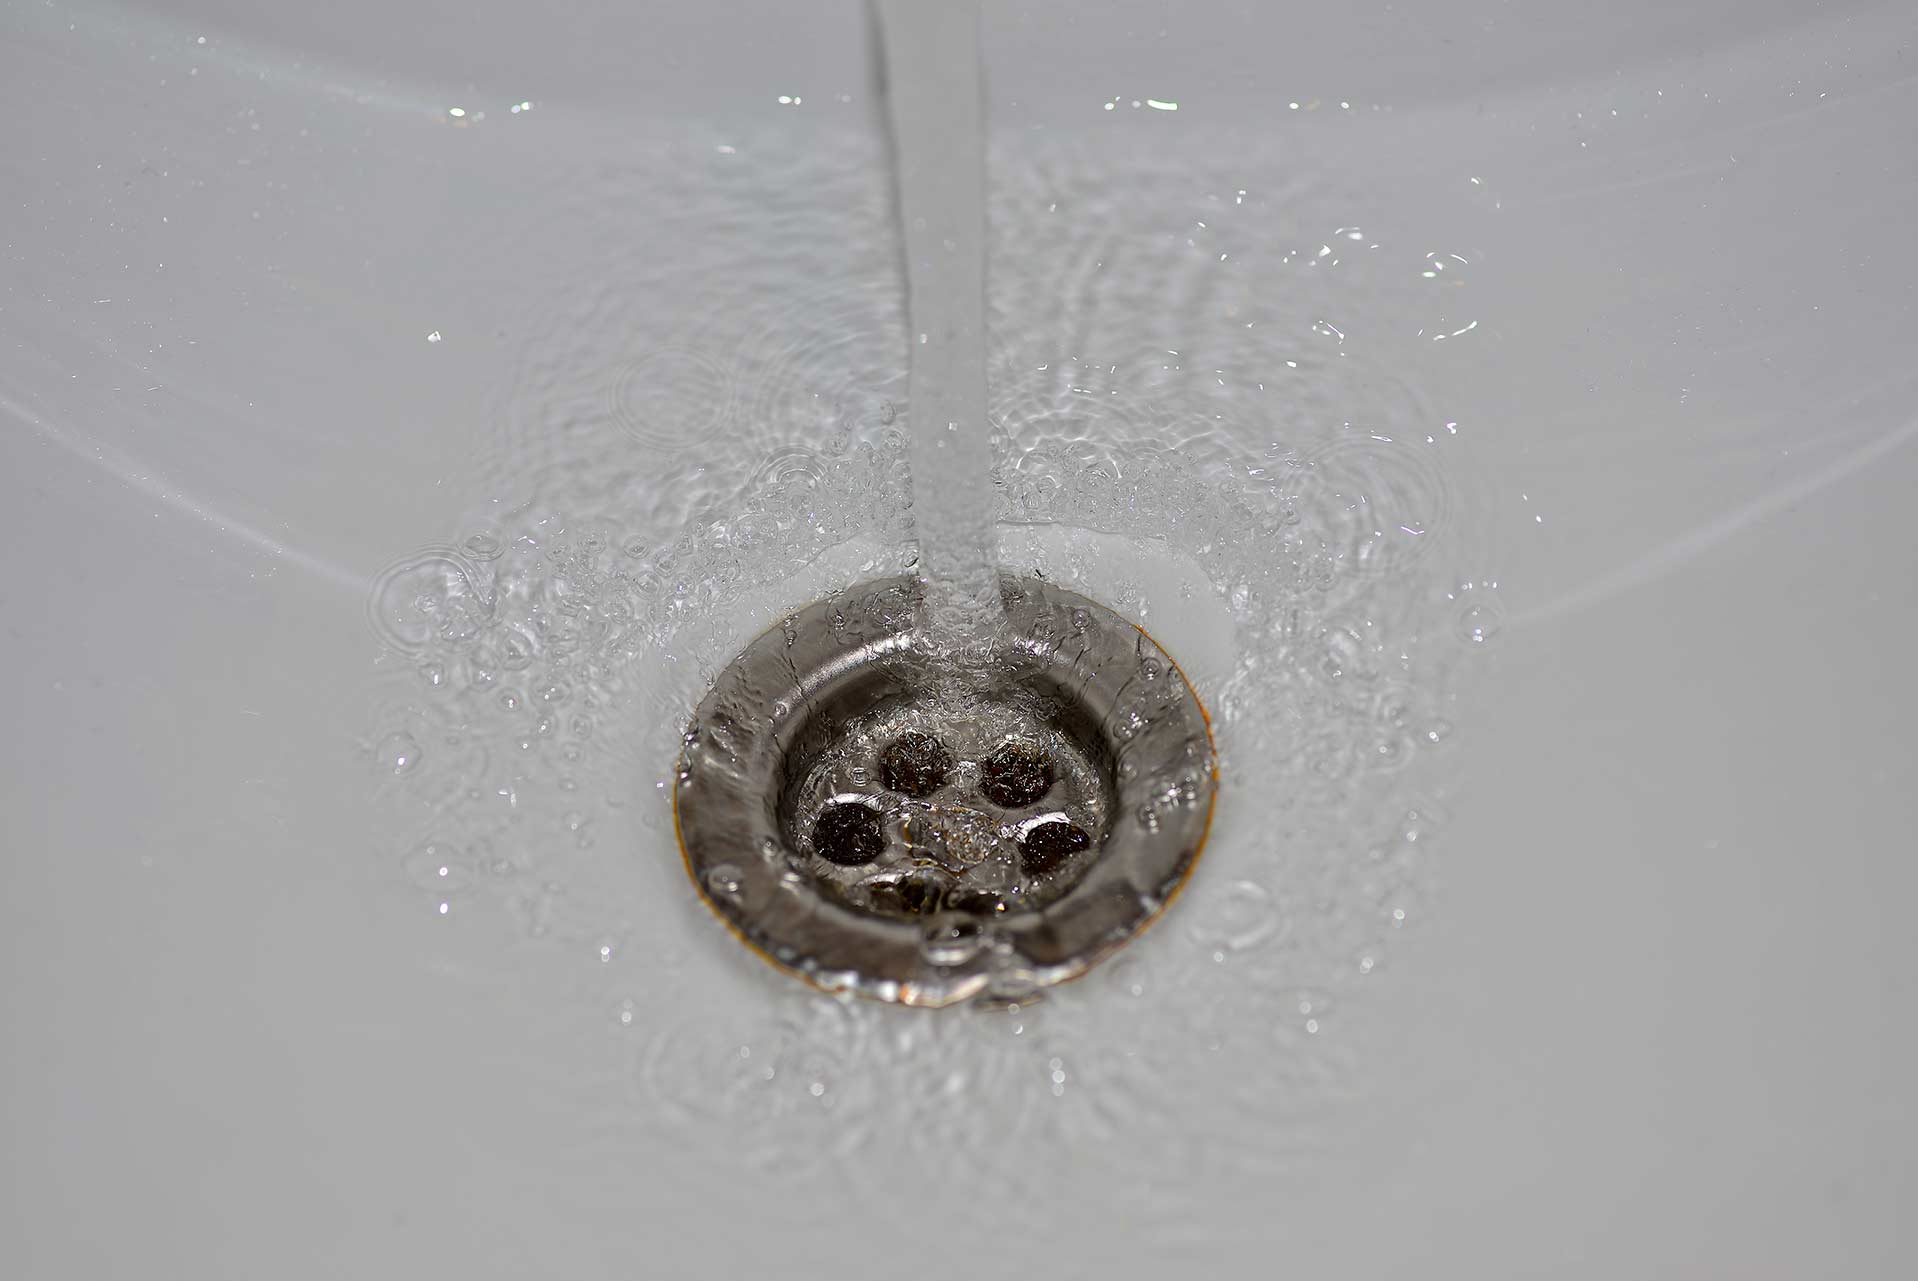 A2B Drains provides services to unblock blocked sinks and drains for properties in Finchampstead.